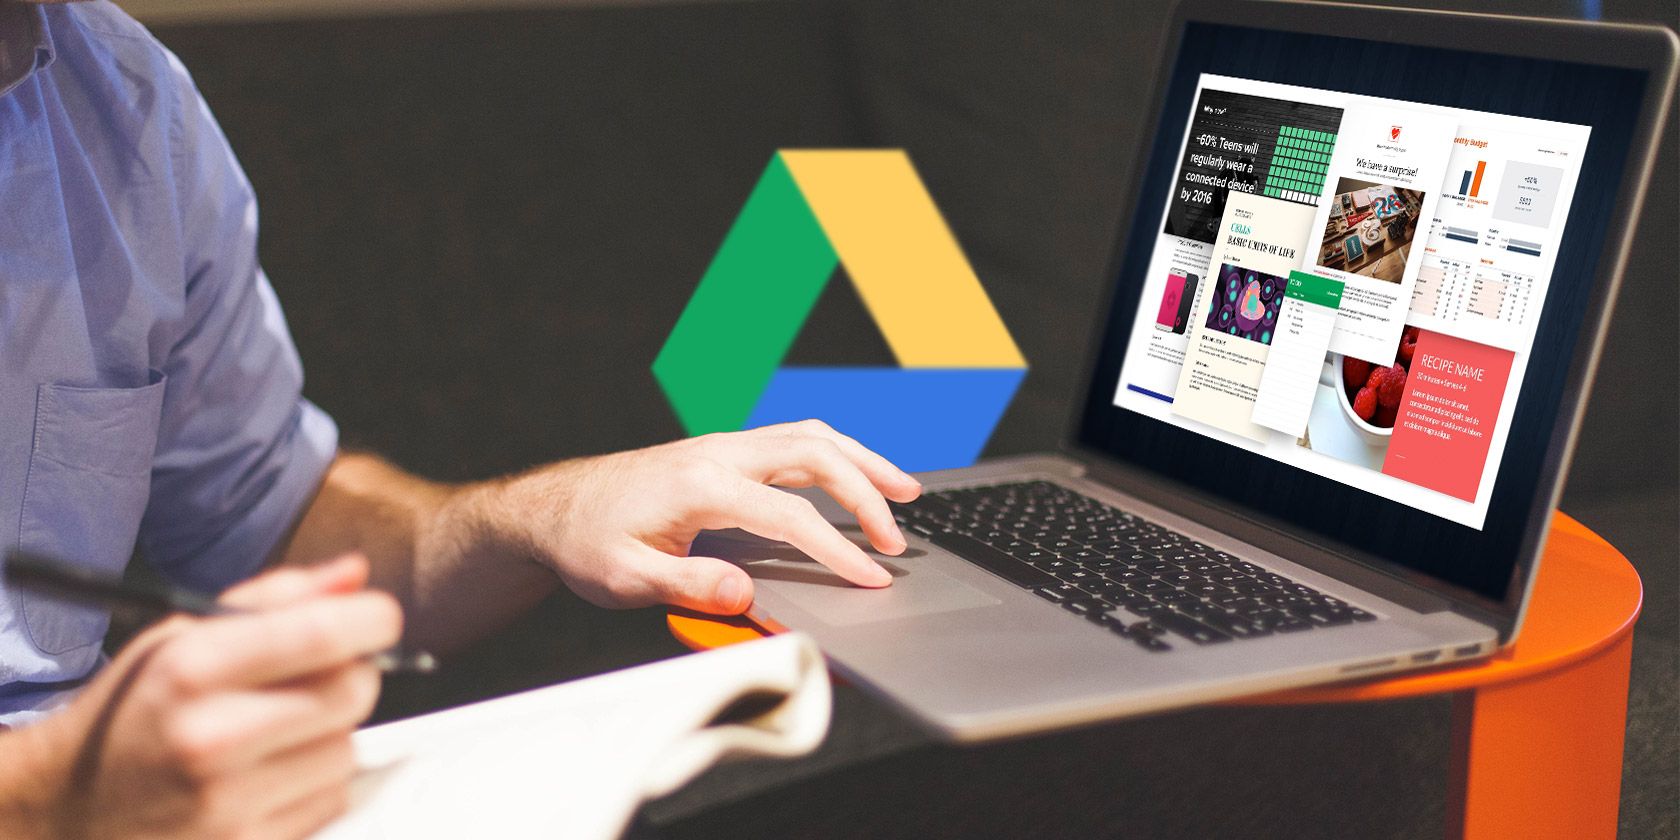 google drive space promotion